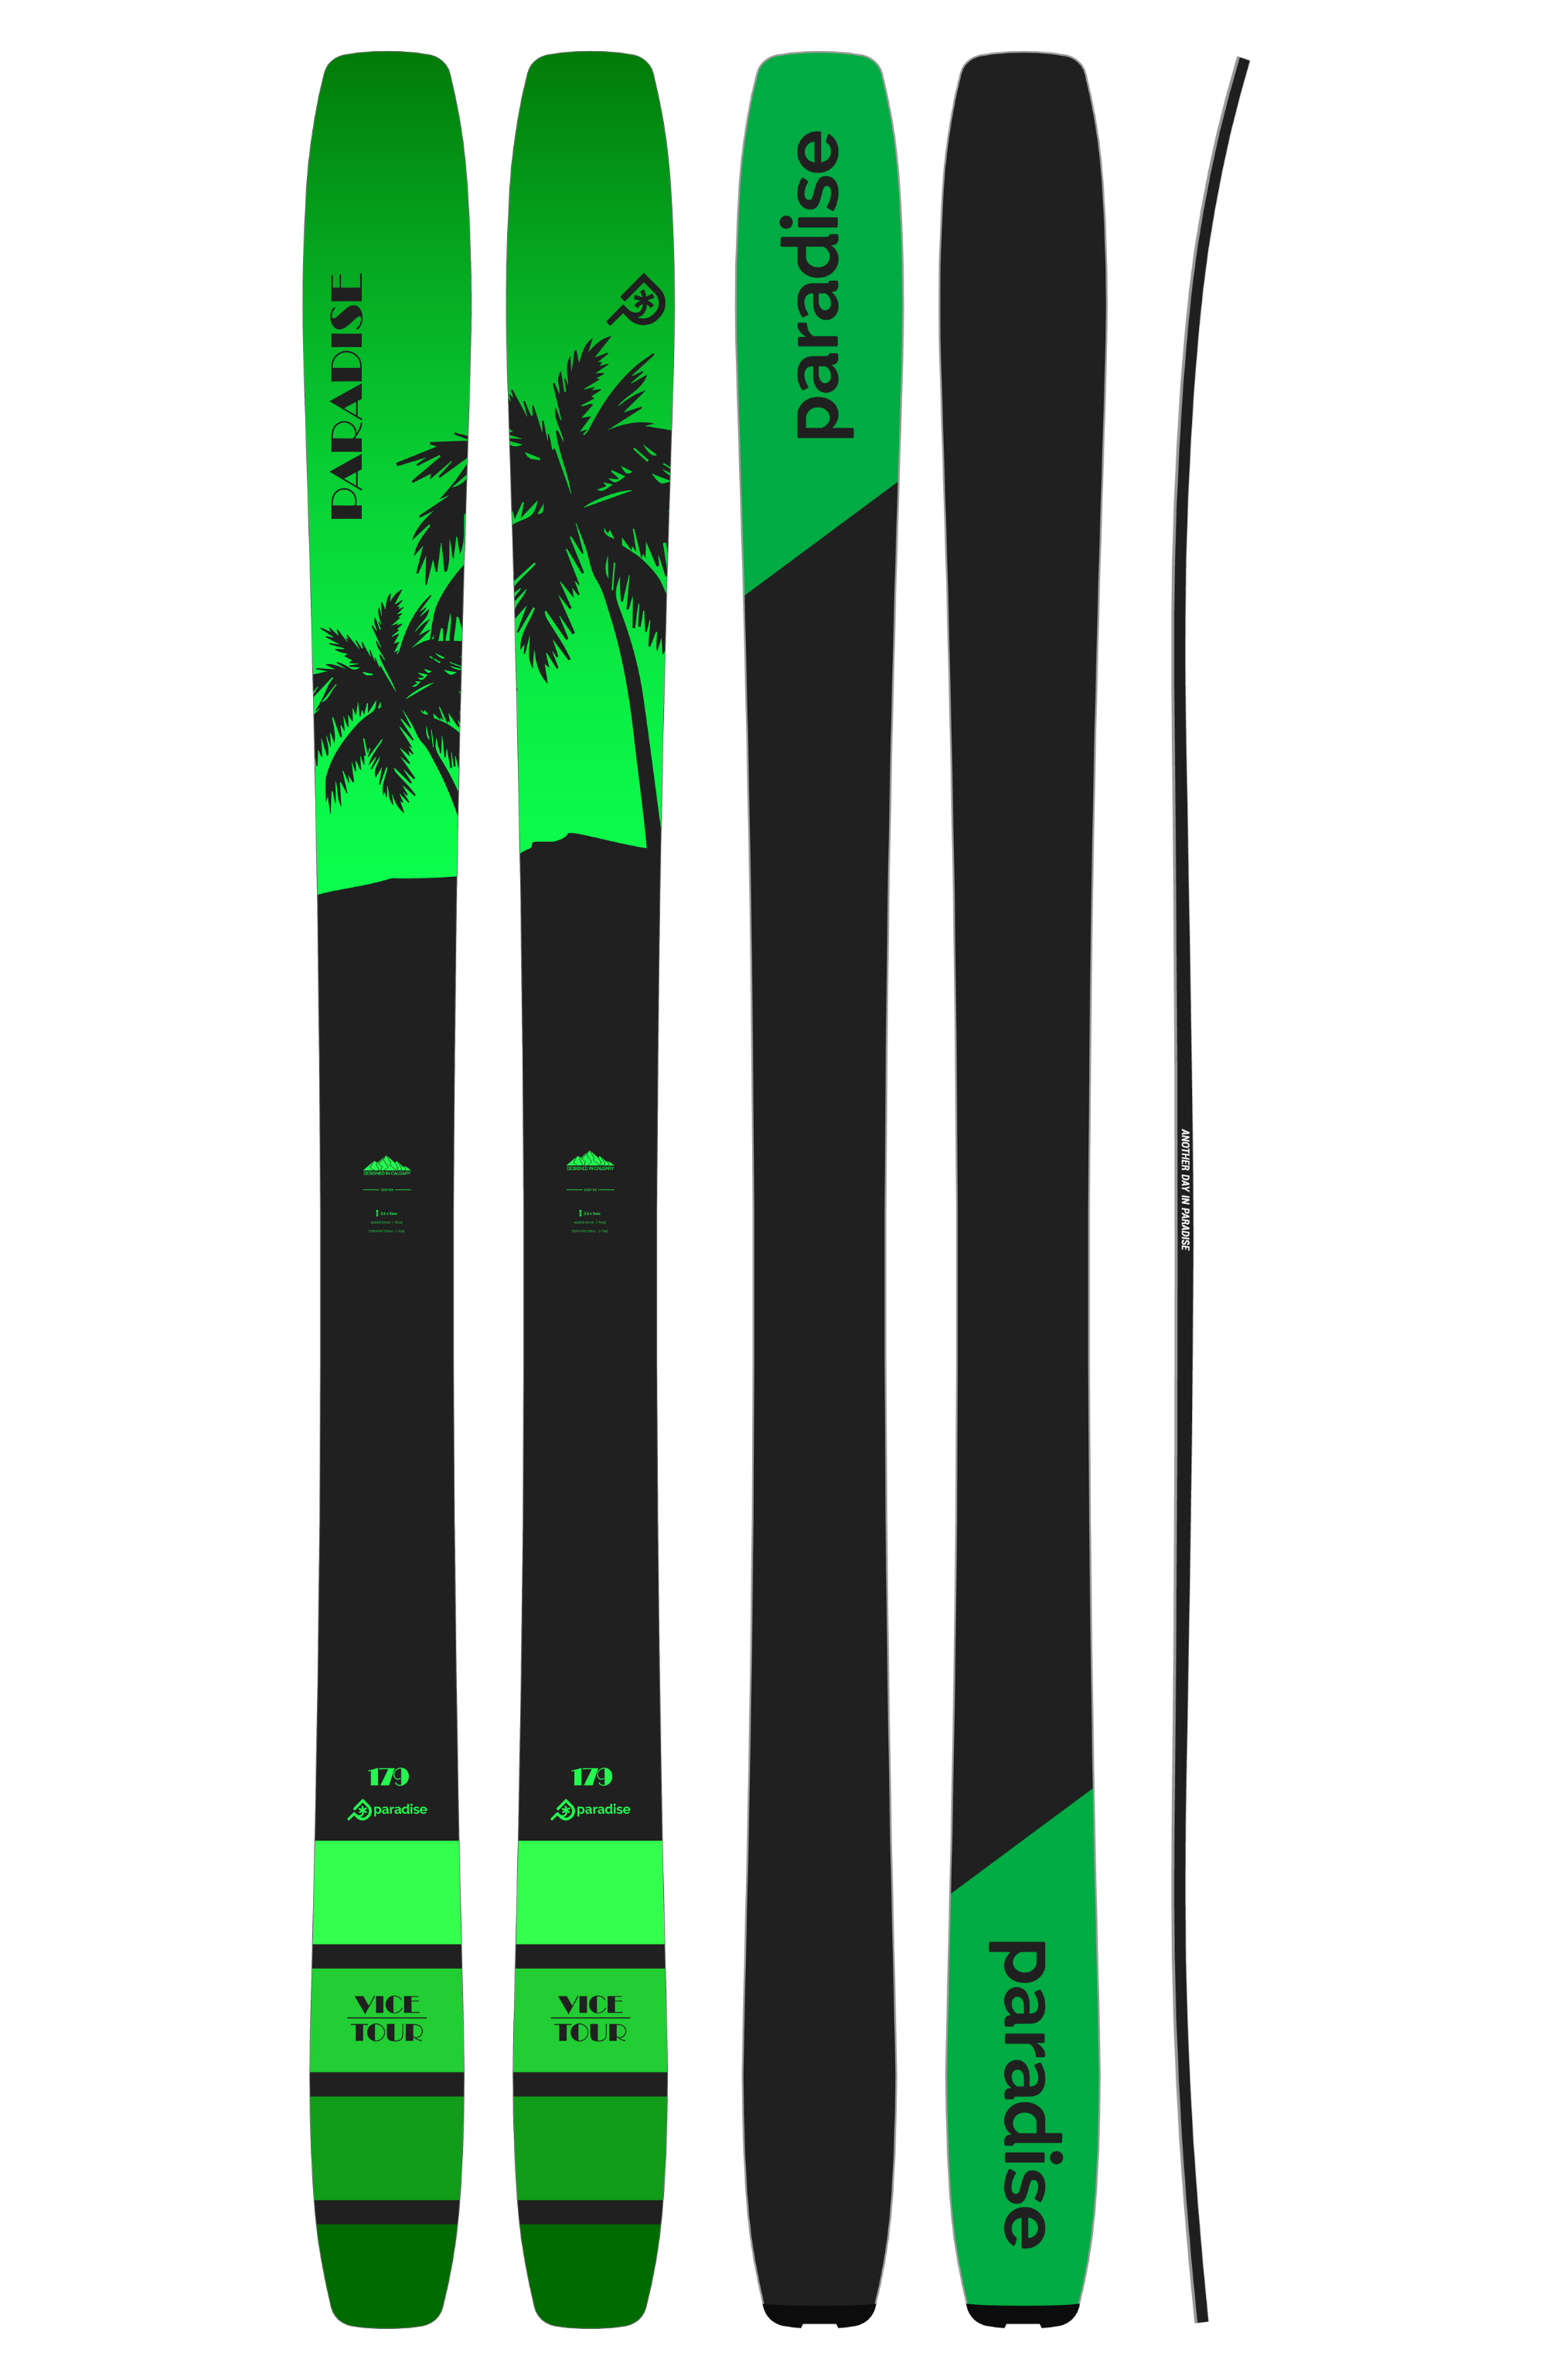 The unisex VICE TOUR backcountry touring ski. Showing the anti ice/scratch top sheet, sintered base, and rocker-camber-rocker profile with sidewall writing.